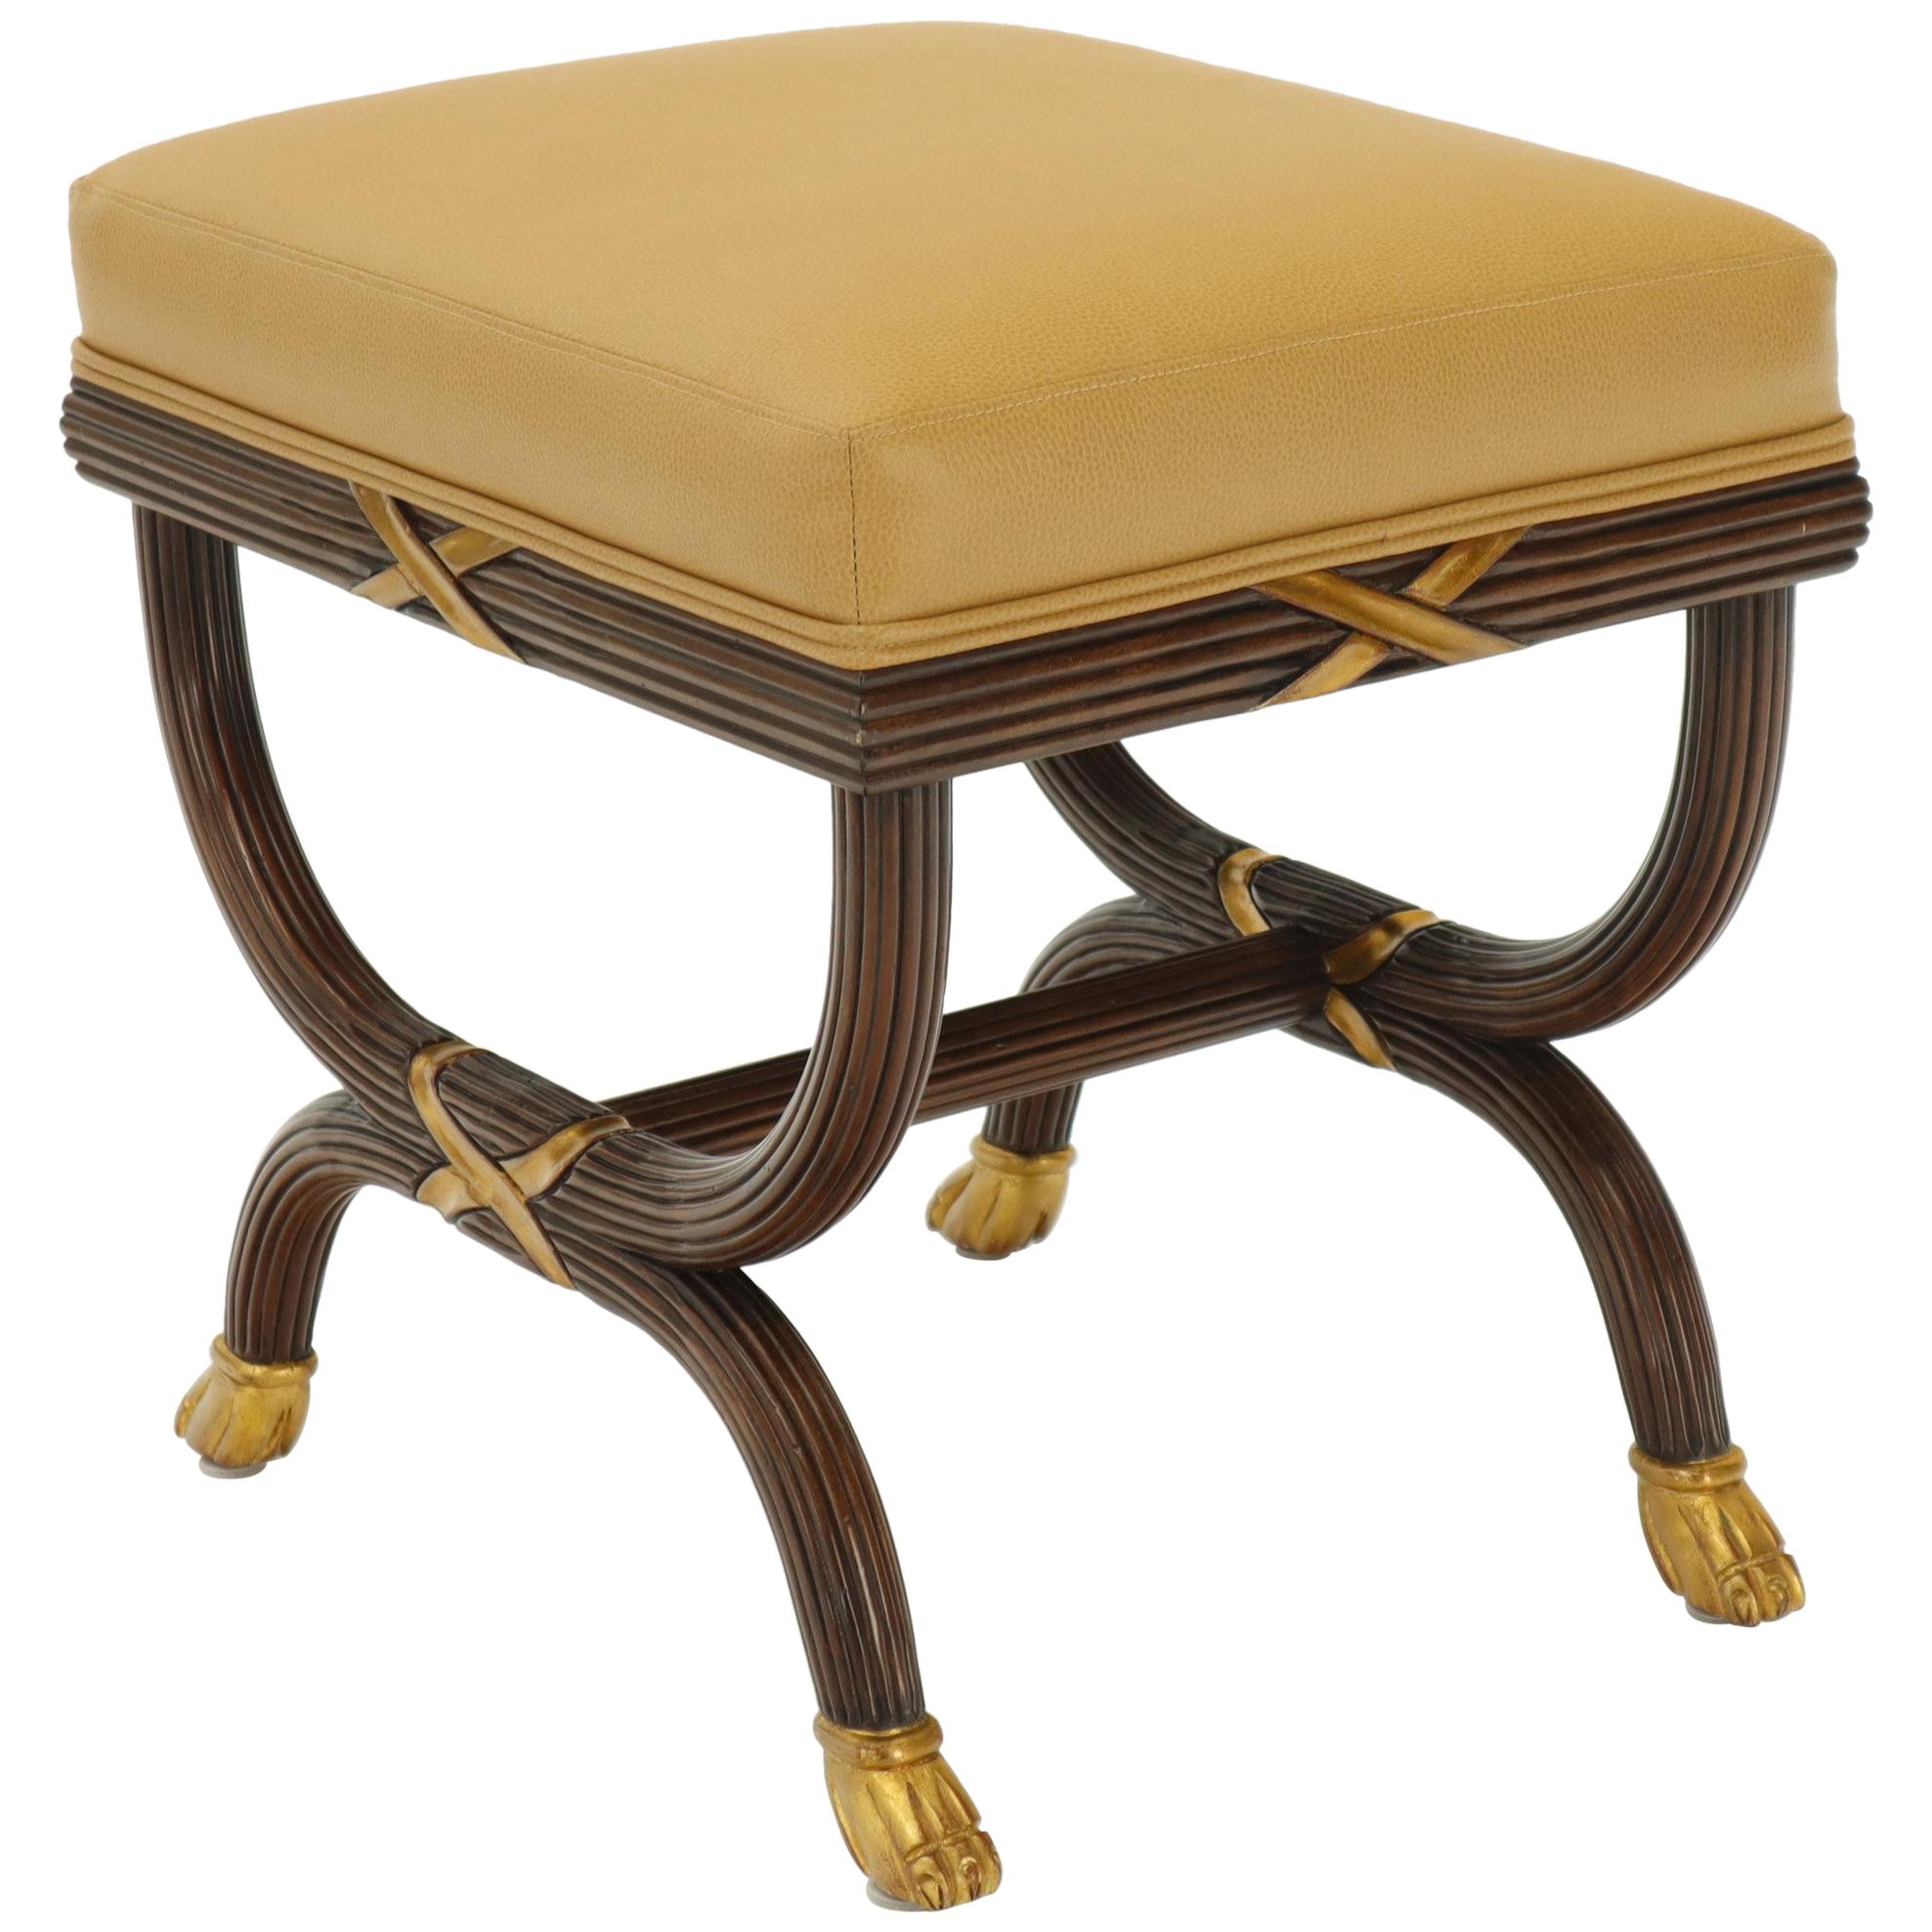 William Switzer Neoclassical Mahogany and Gold X Base Ottoman Bench